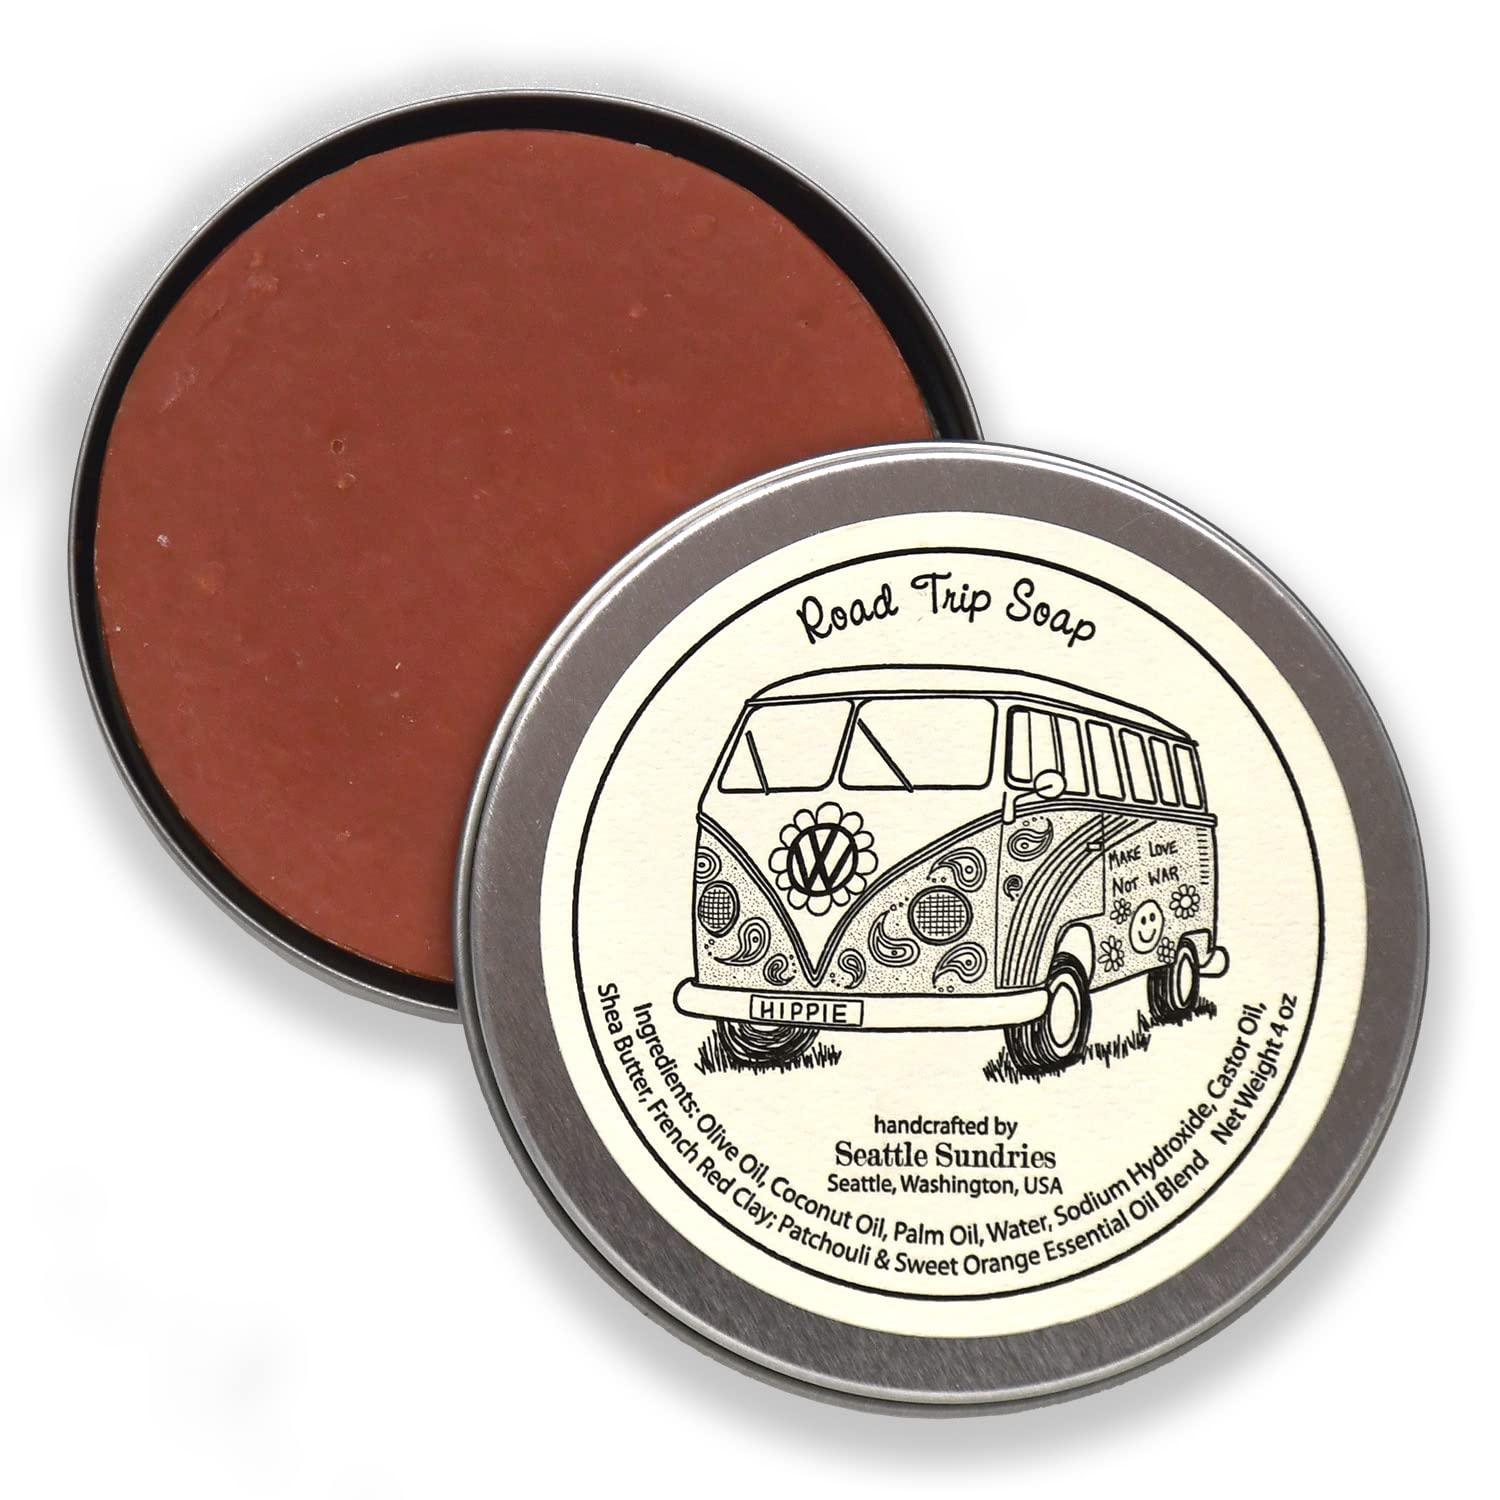 Seattle Sundries | Patchouli Soap Bar for Women & Men - 1 (4) Handmade Bar Soap in a Low Waste Travel Tin - Volkswagen Bus Gift